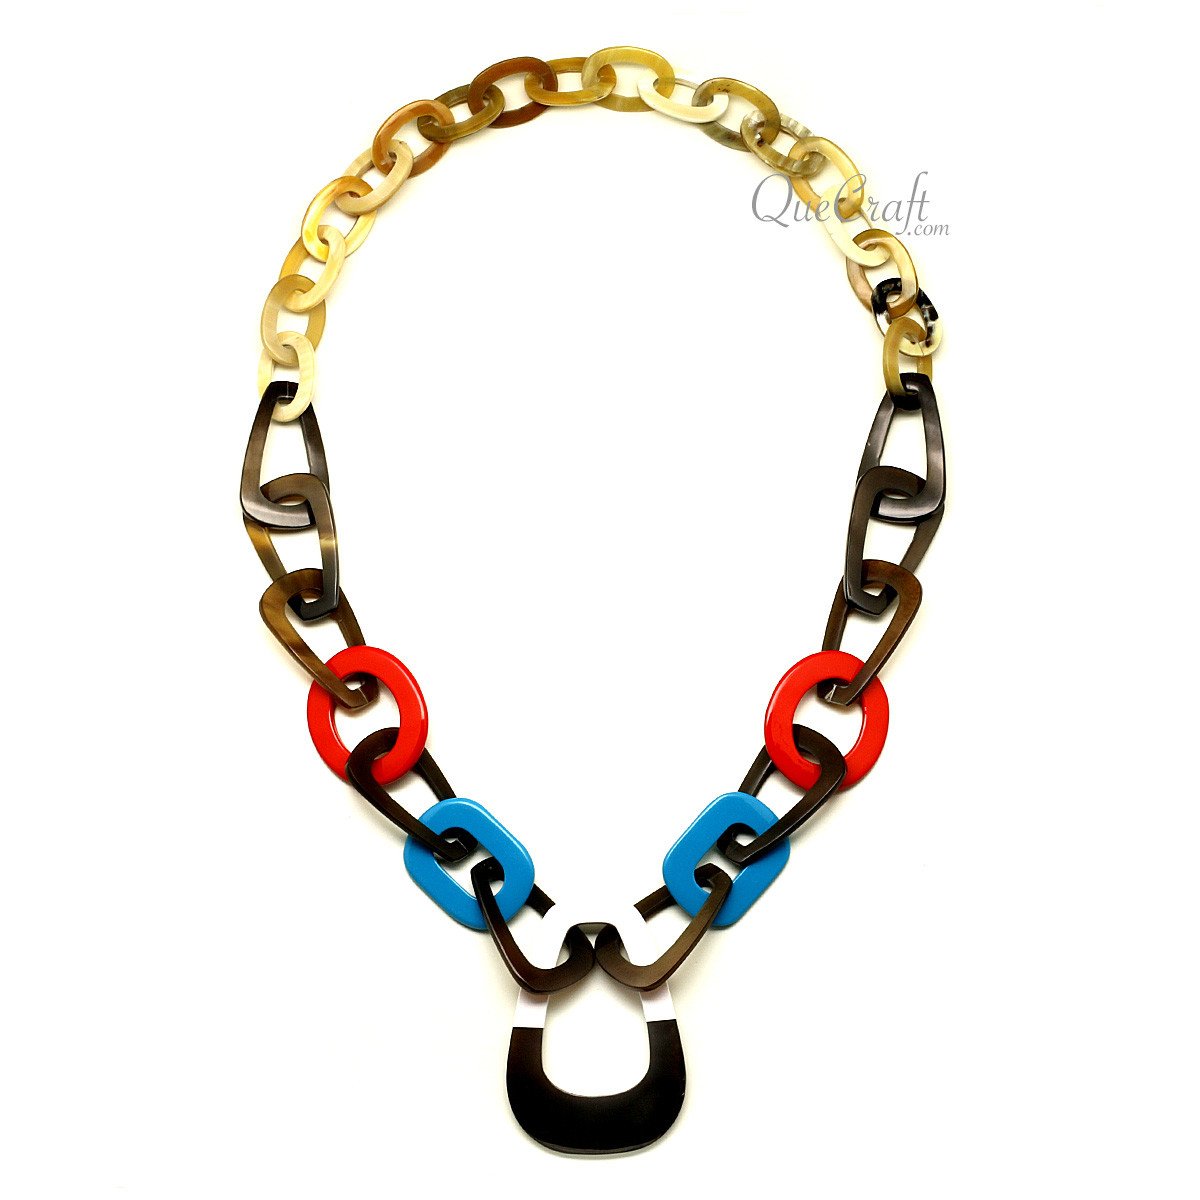 Horn & Lacquer Chain Necklace #12253 - HORN JEWELRY